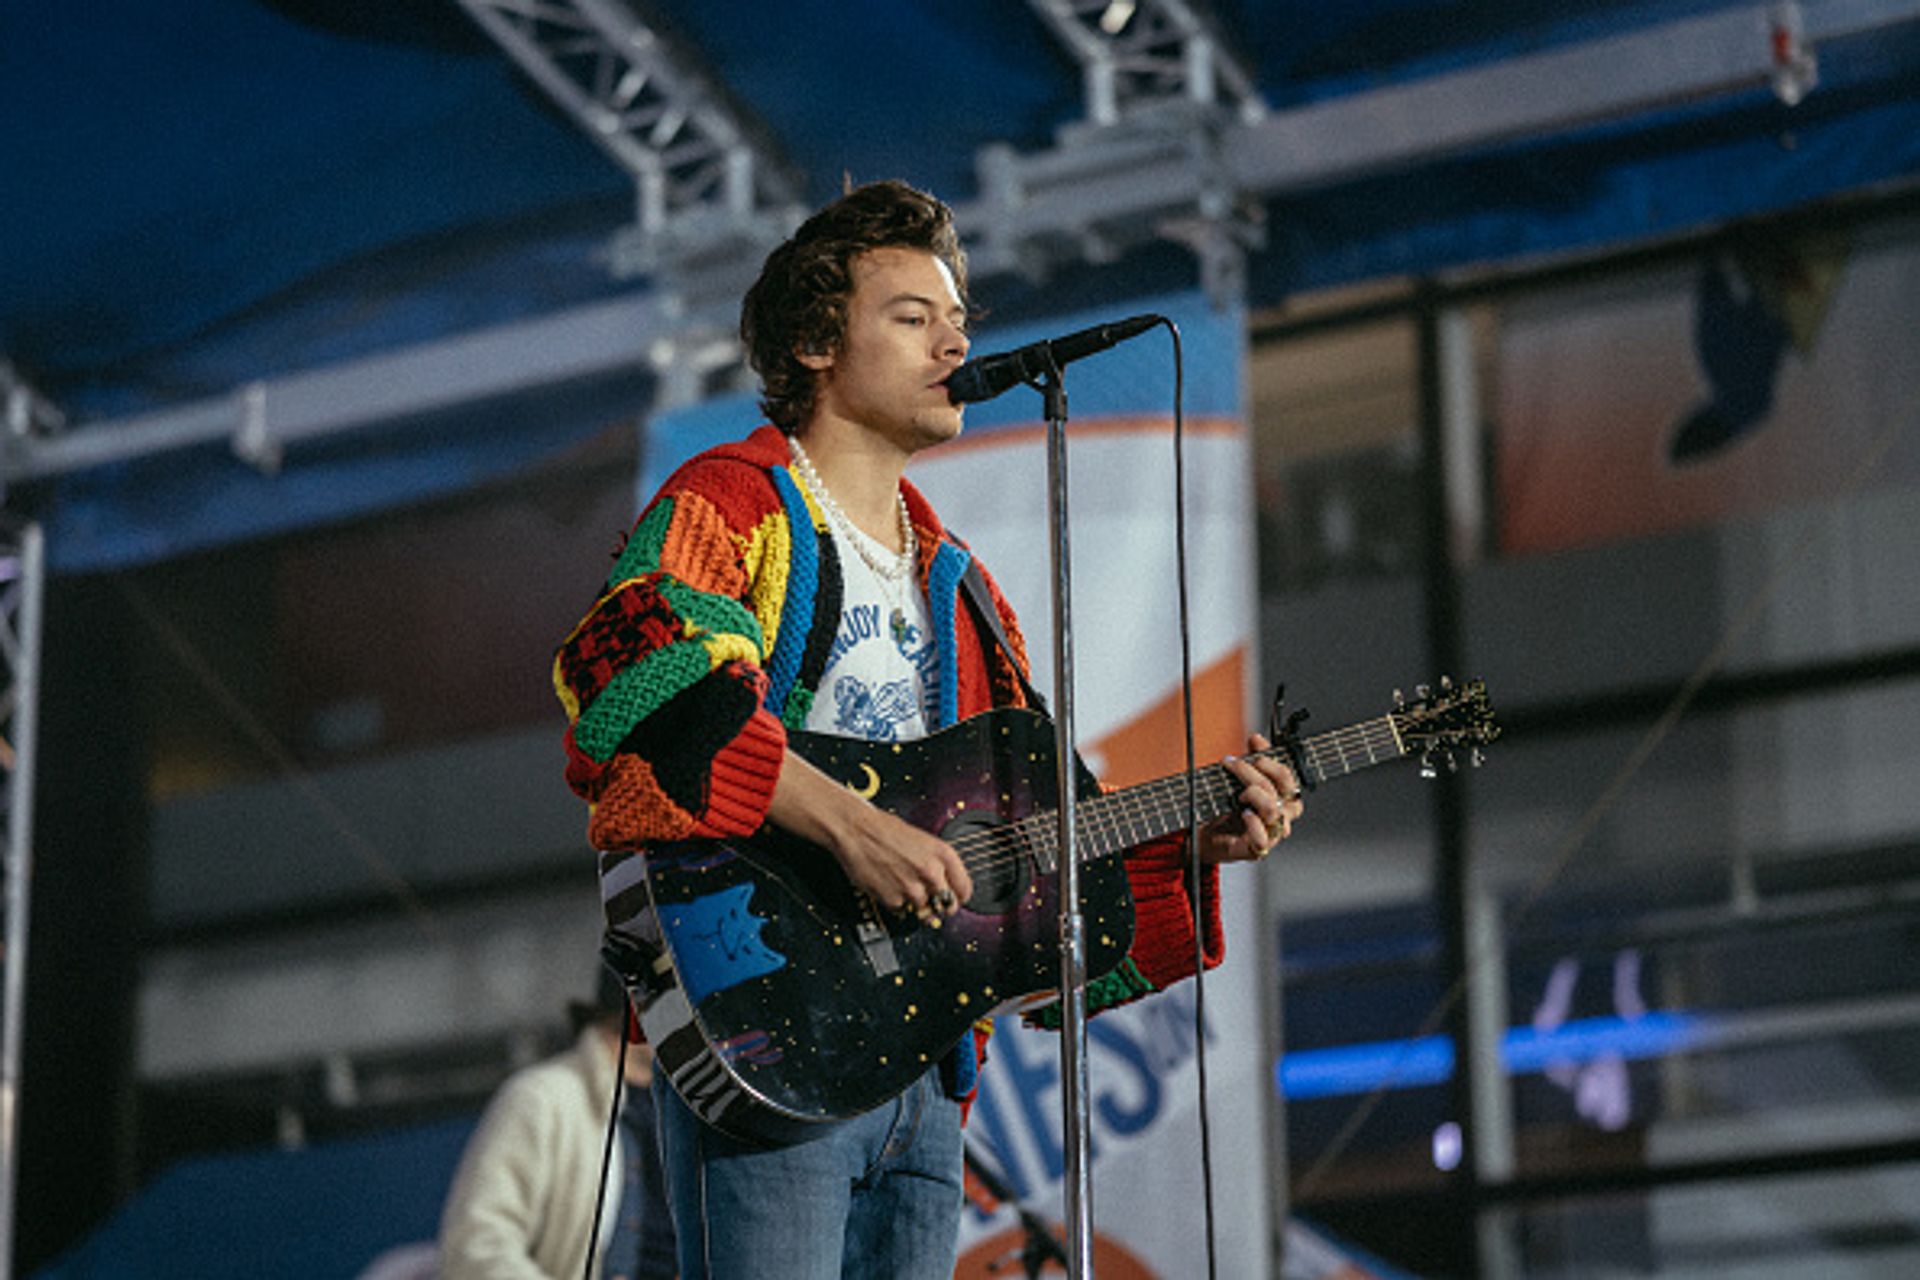 Harry Styles rehearsing for the Tonight Show in 2020, wearing a patchwork cardigan that has since found internet fame